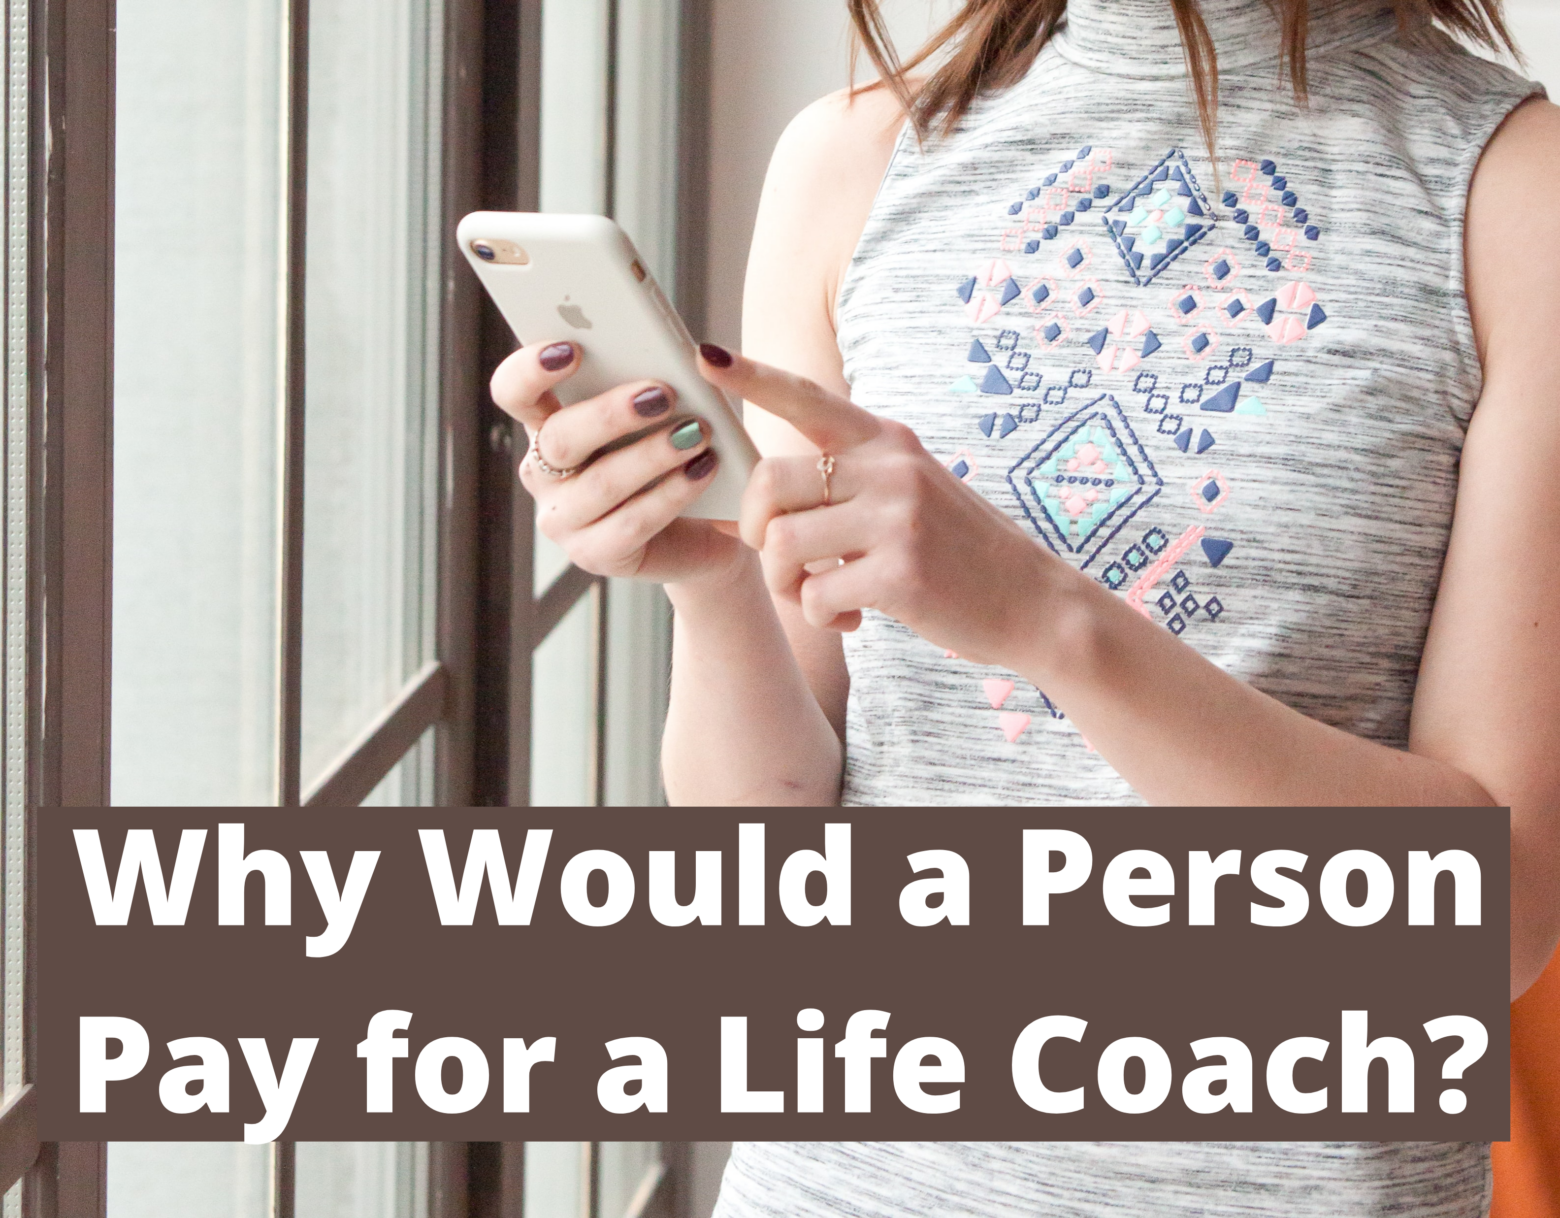 Why Would a Person Pay for a Life Coach?